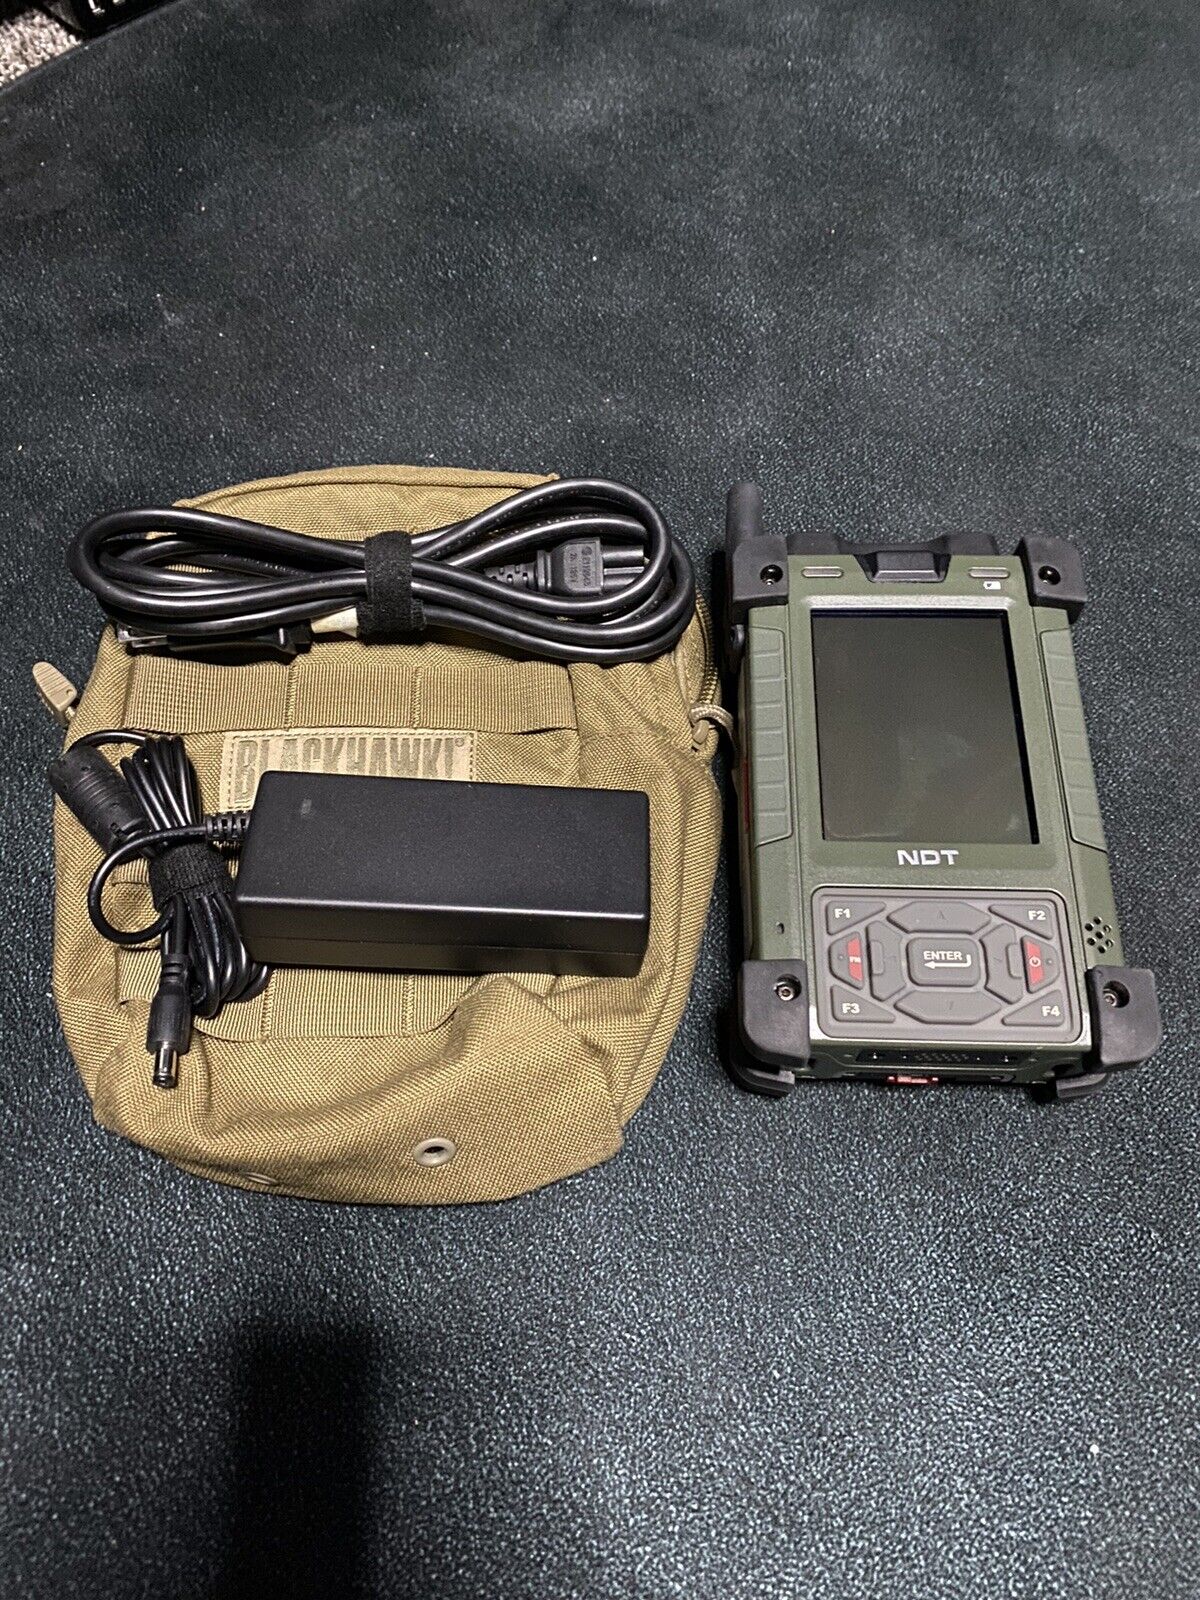 Military PDA Computer New Condition NOS